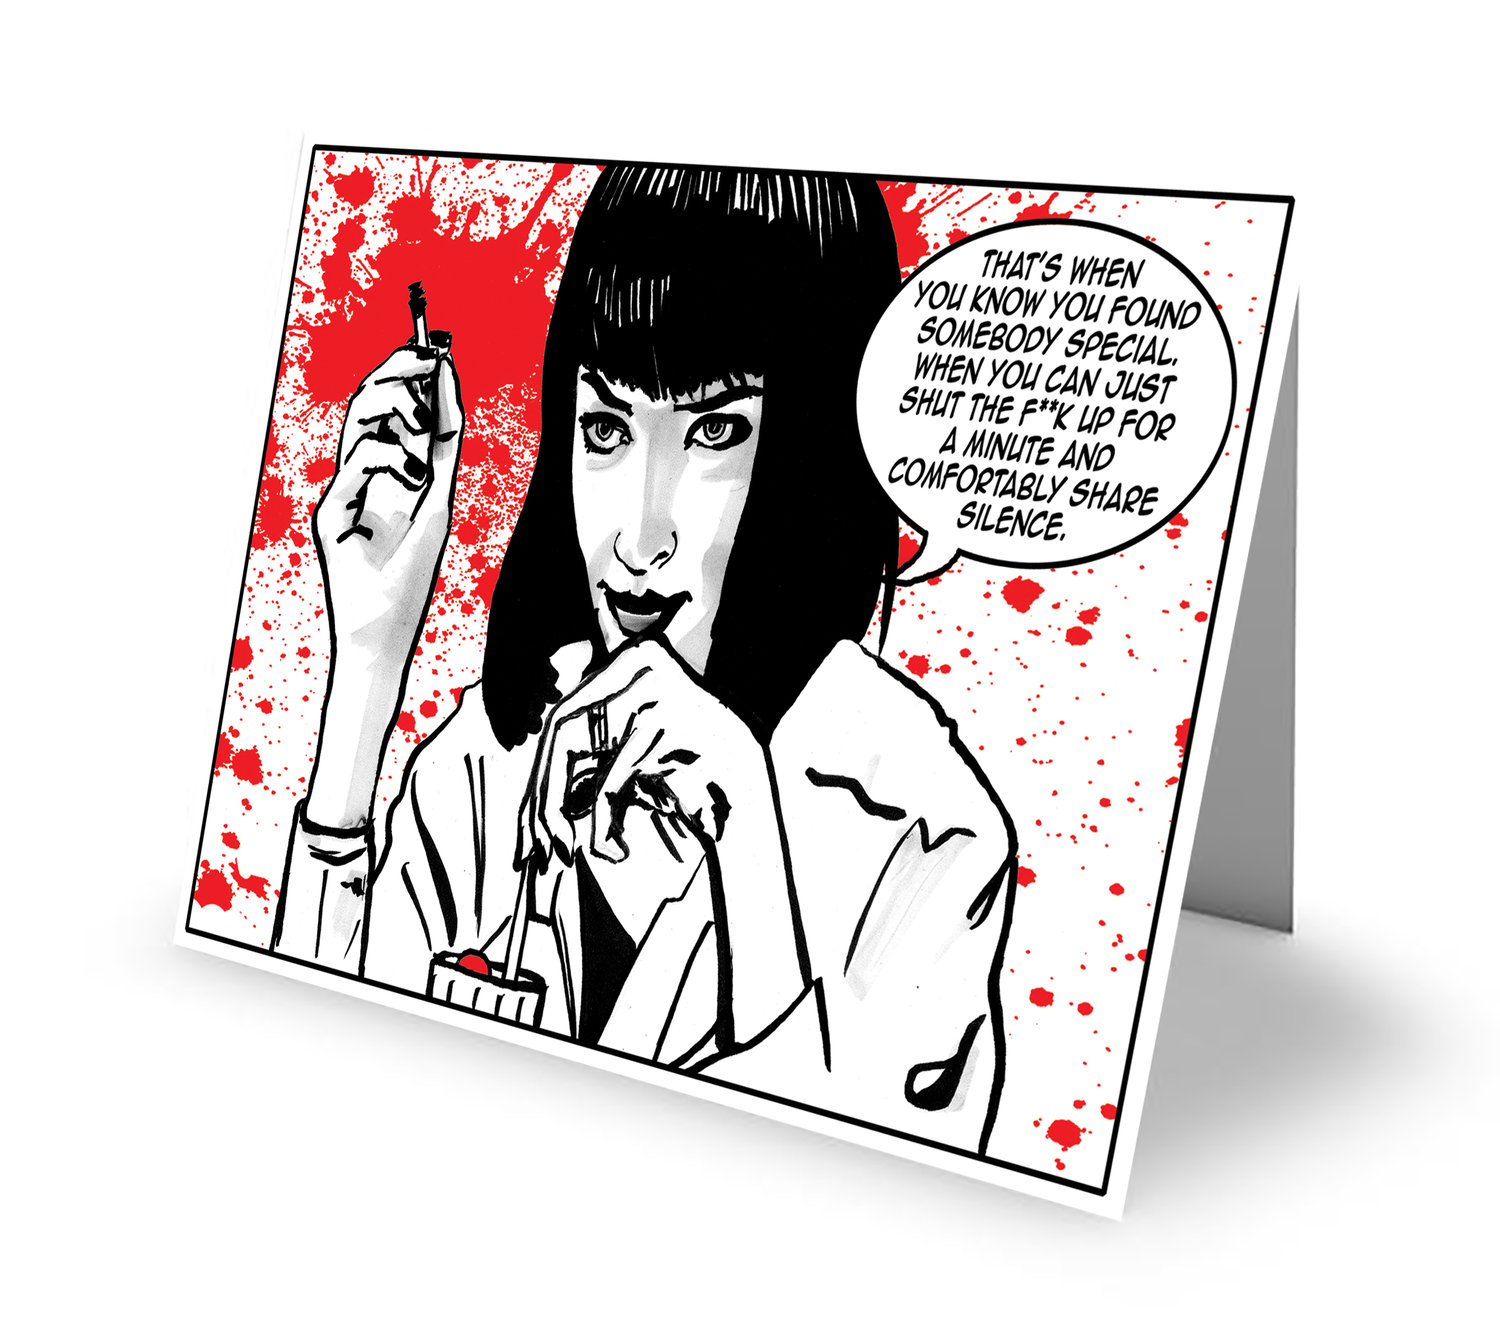 Mia Wallace (Pulp Fiction) 'Comfortable Silence' Greetings Card with Envelope (C6 Size)